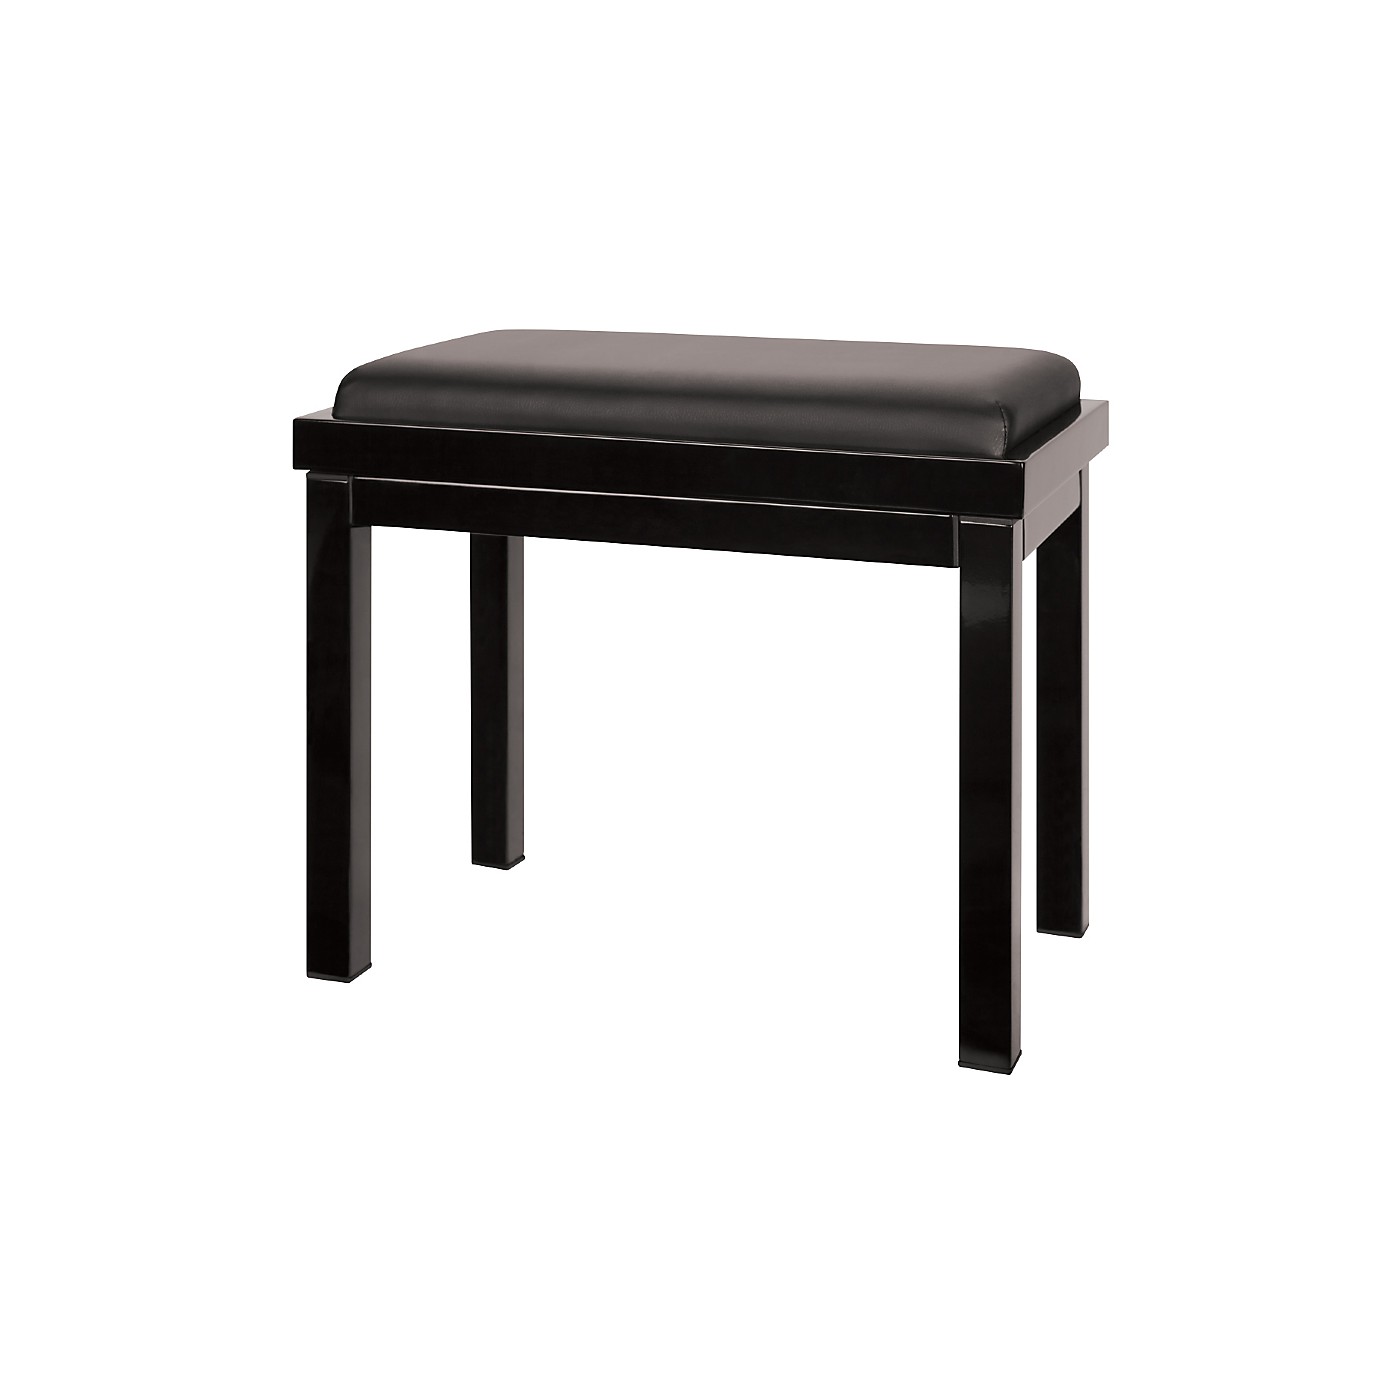 Proline Faux Leather Steel Piano Bench thumbnail